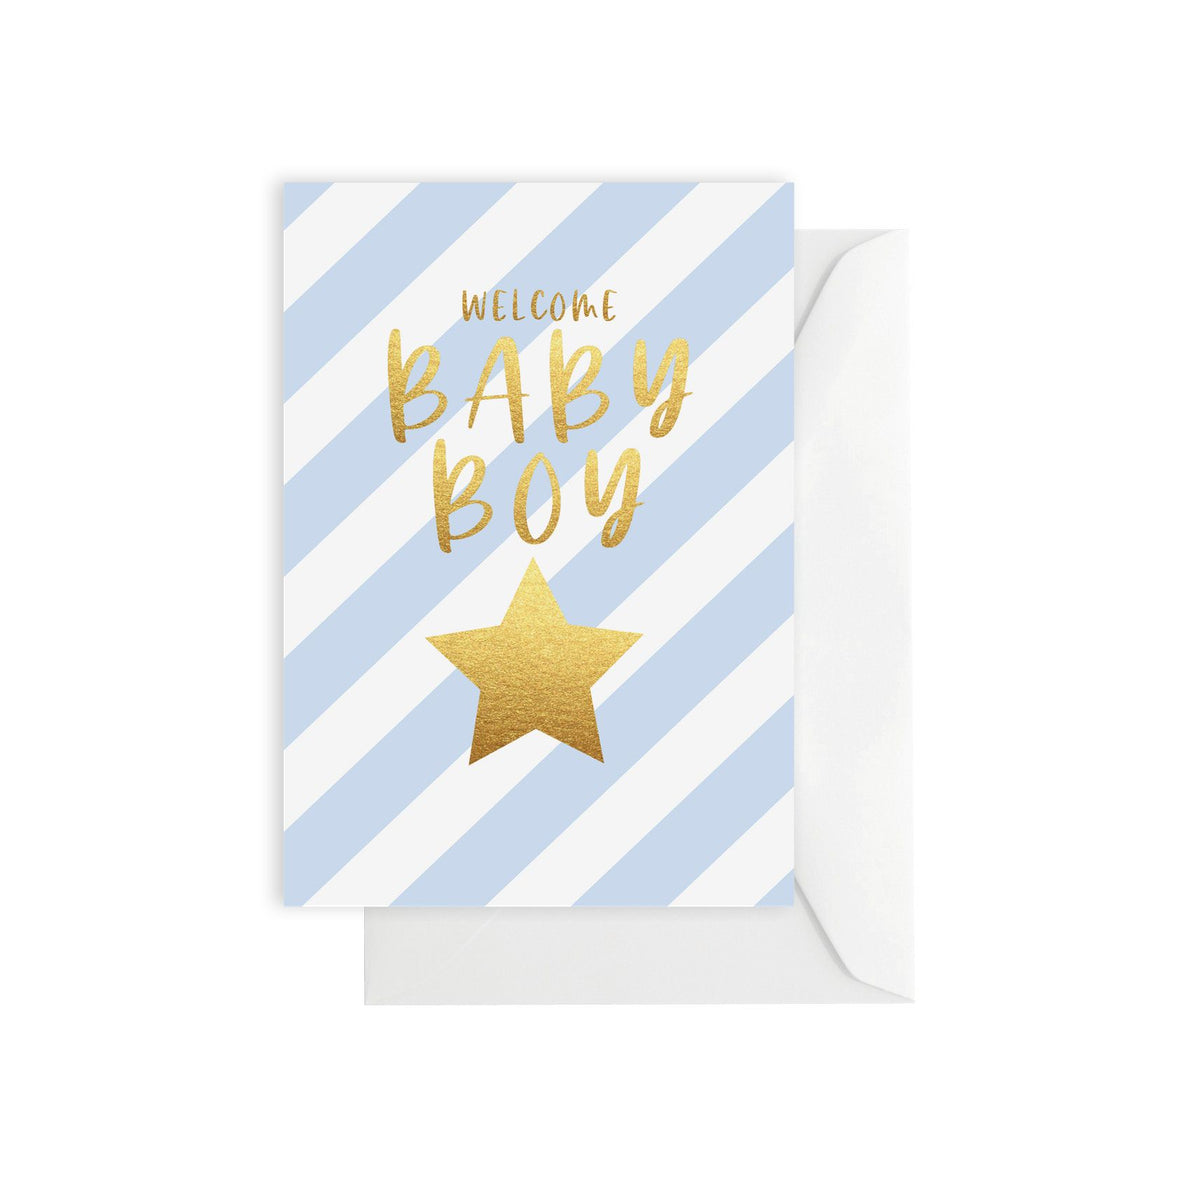 ELM Paper - Card - Baby - Baby Boy Stripe <Outgoing>